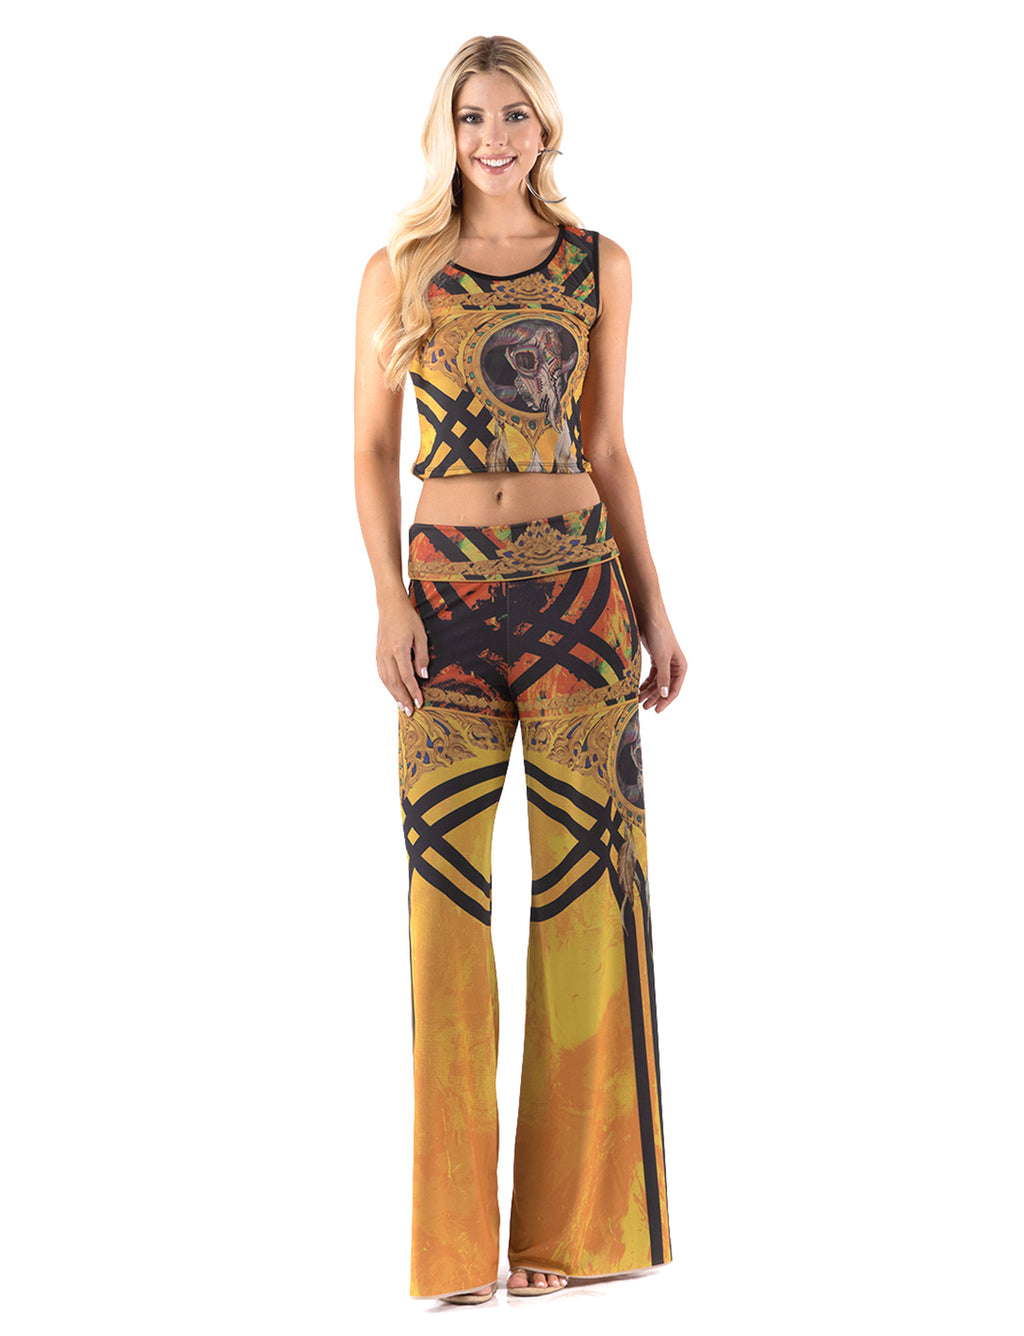 Yellow Tribal Aztec High waist palazzo pants featuring wide legs, and a comfortable stretchy fabric perfect for Evening wear, Beach Day, Vacation, Dance, Poolside Parties,Casual day